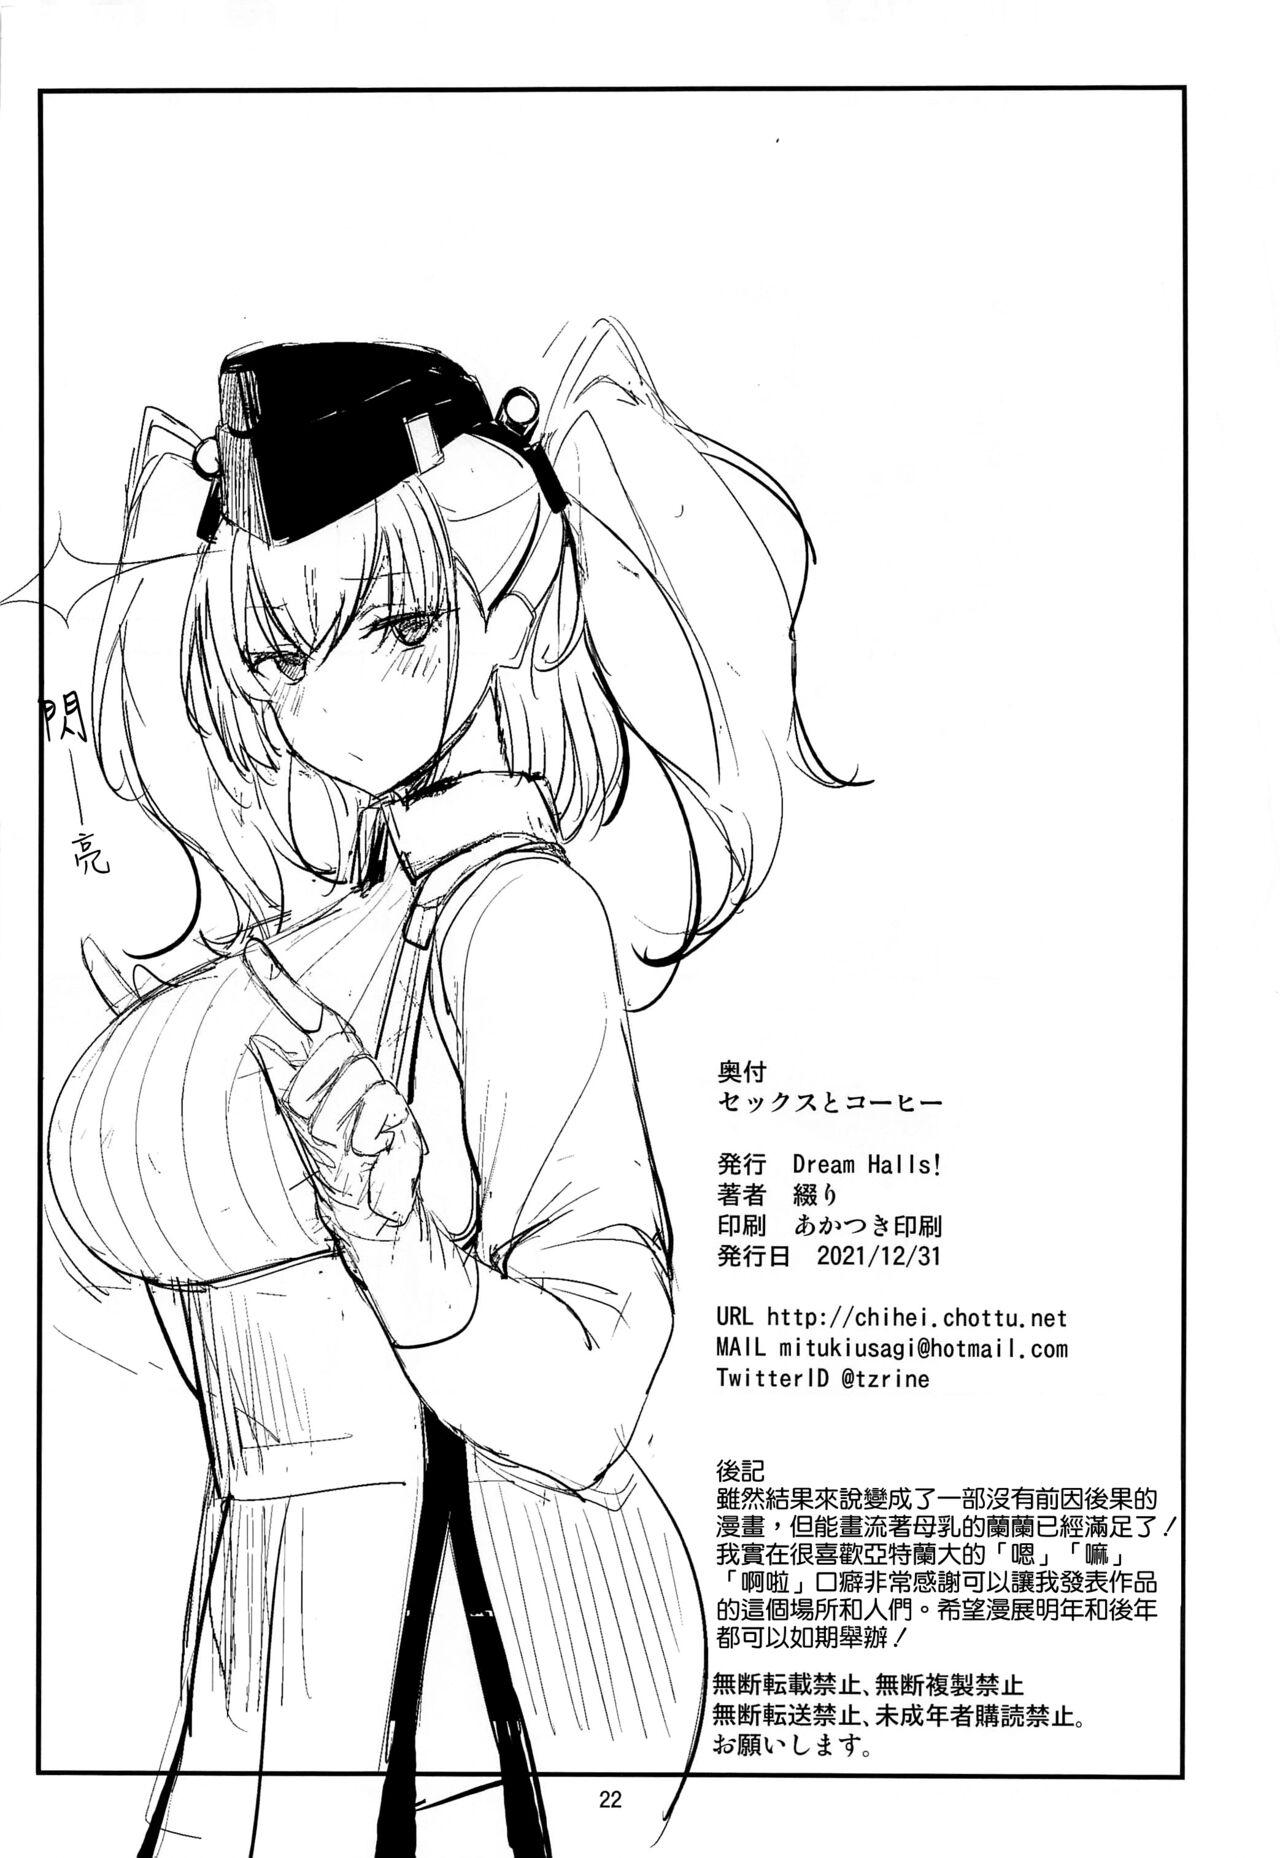 Concha Sex to Coffee - Kantai collection Prostitute - Page 22